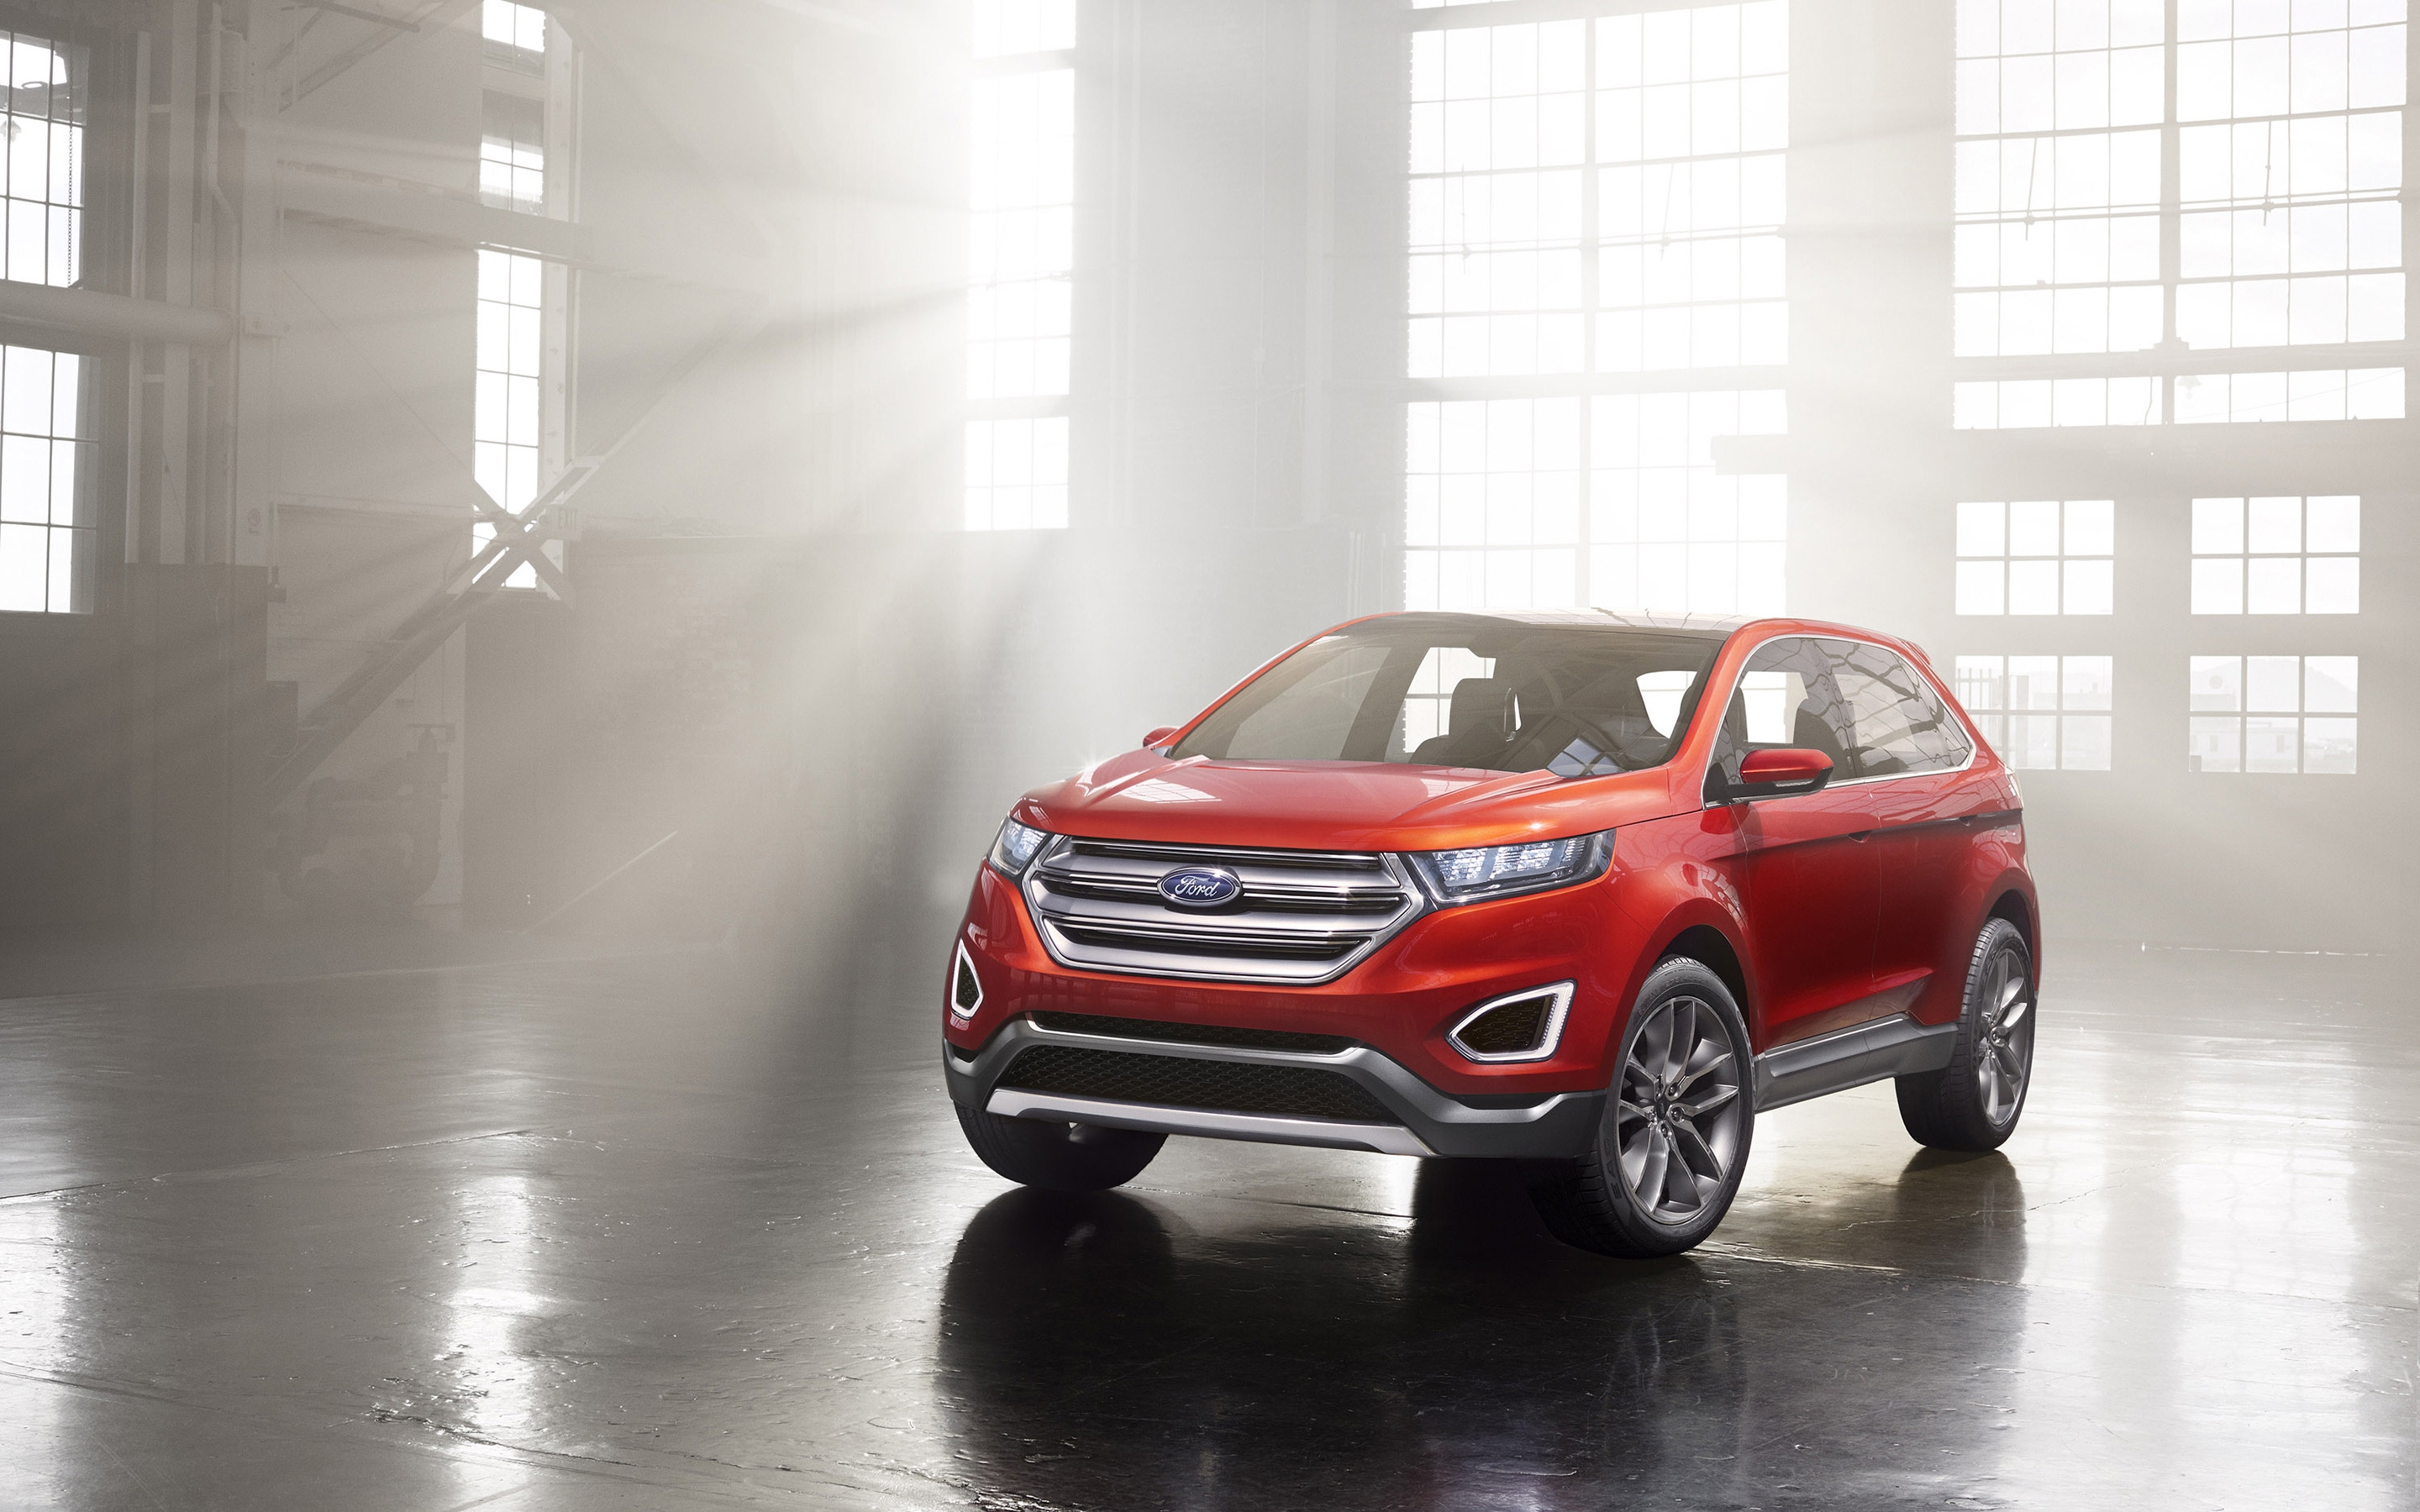 Ford Edge Concept for 2880 x 1800 Retina Display resolution